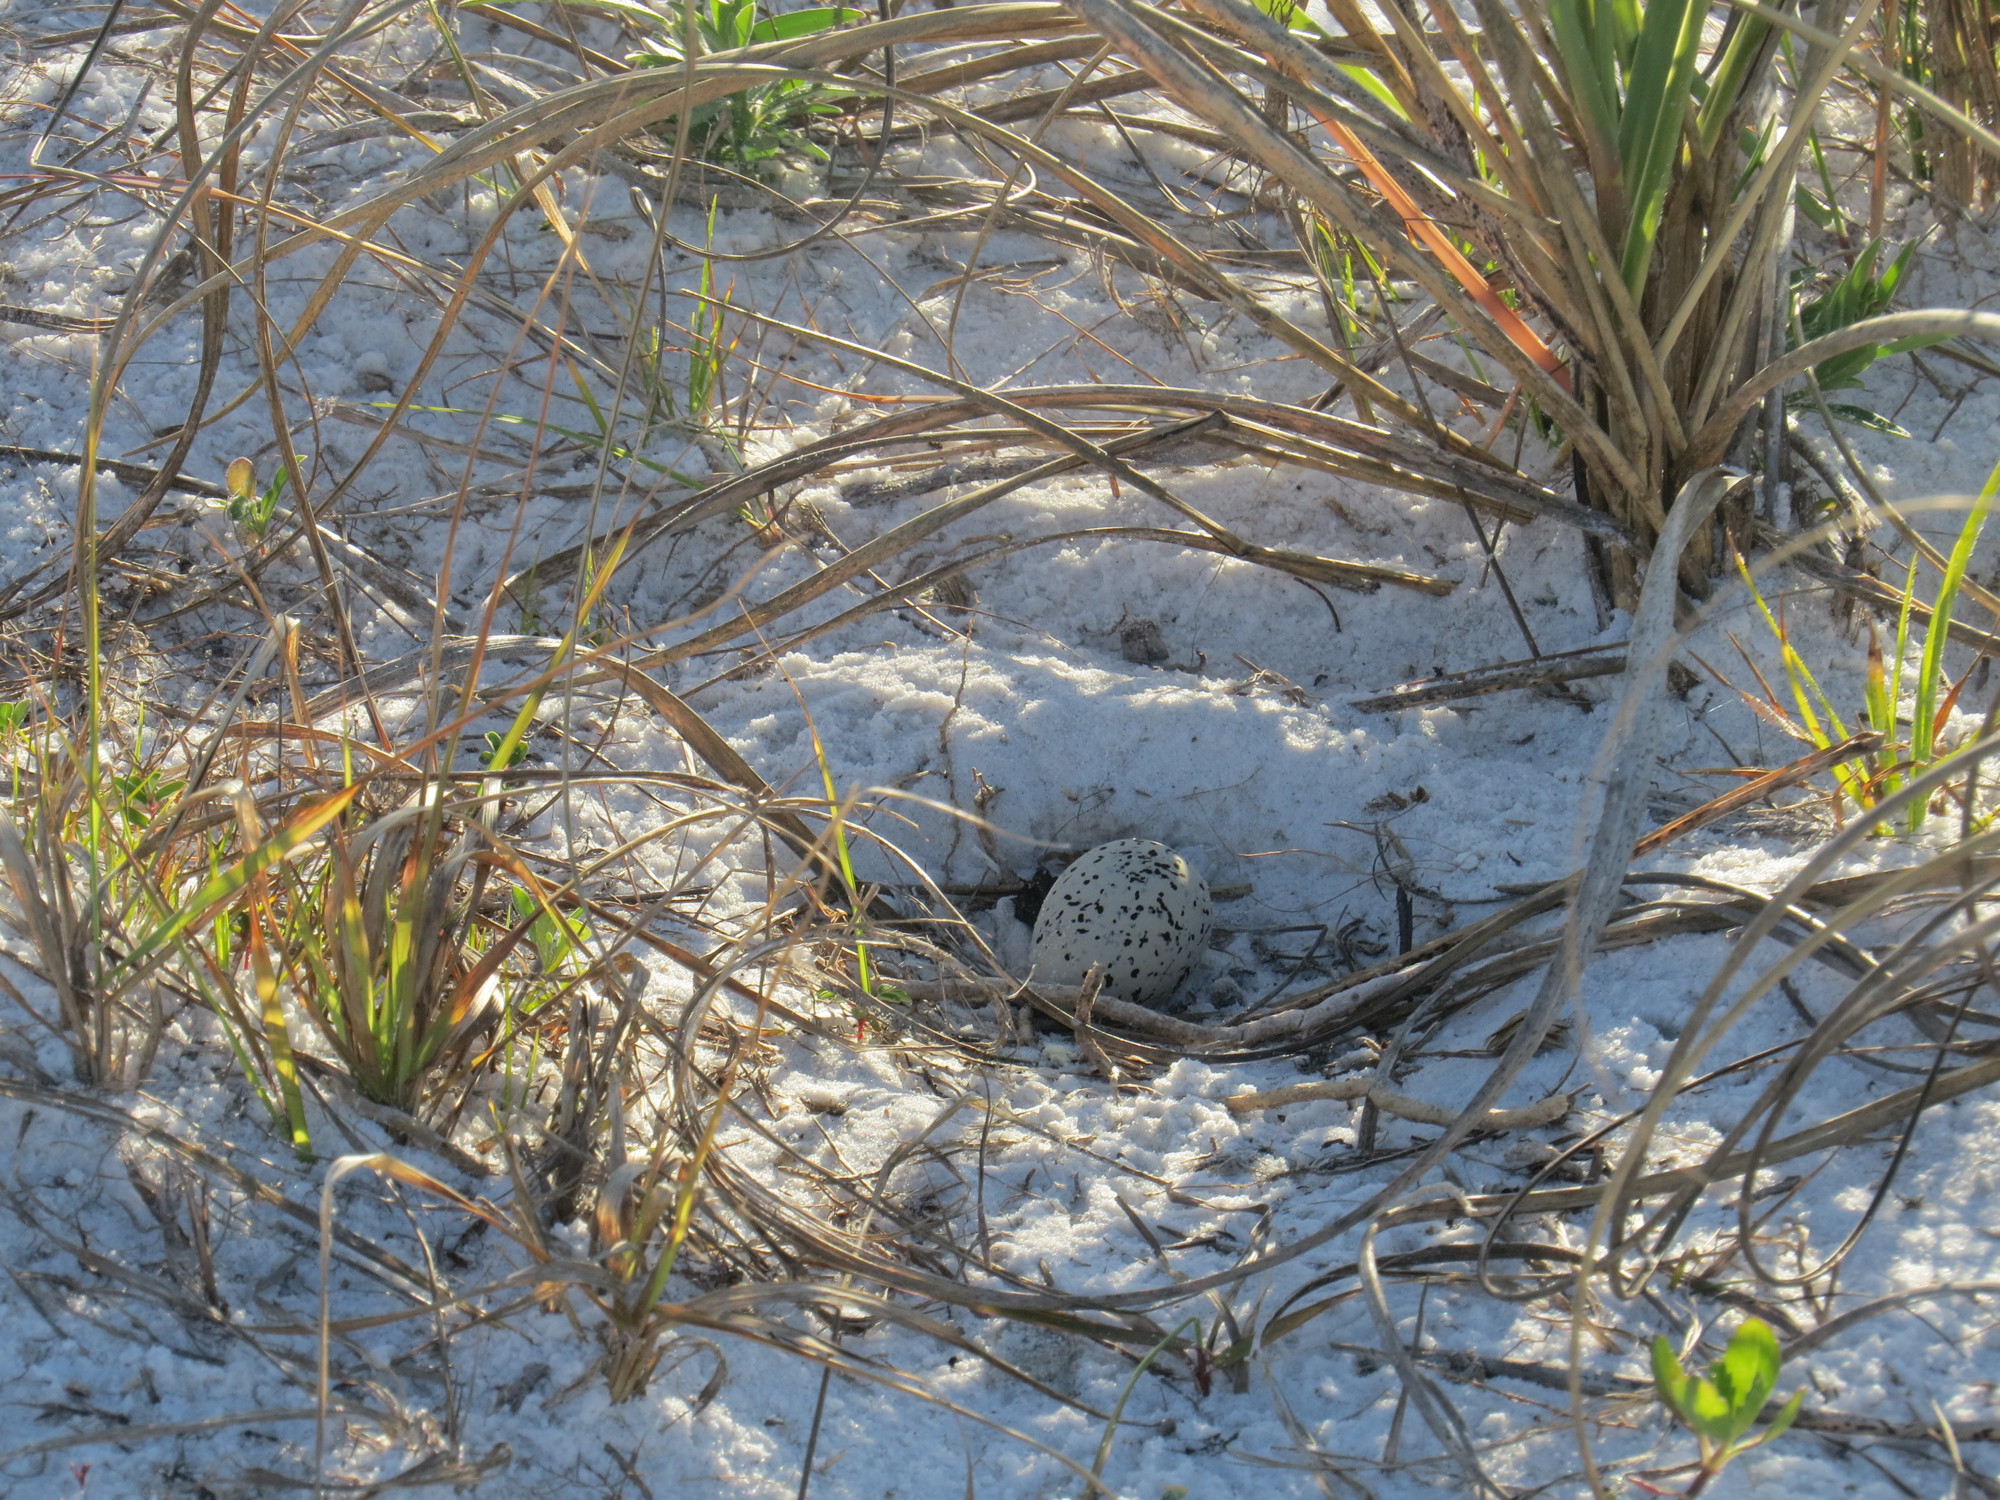 The lone egg can blends into the nest and surrounding foliage.